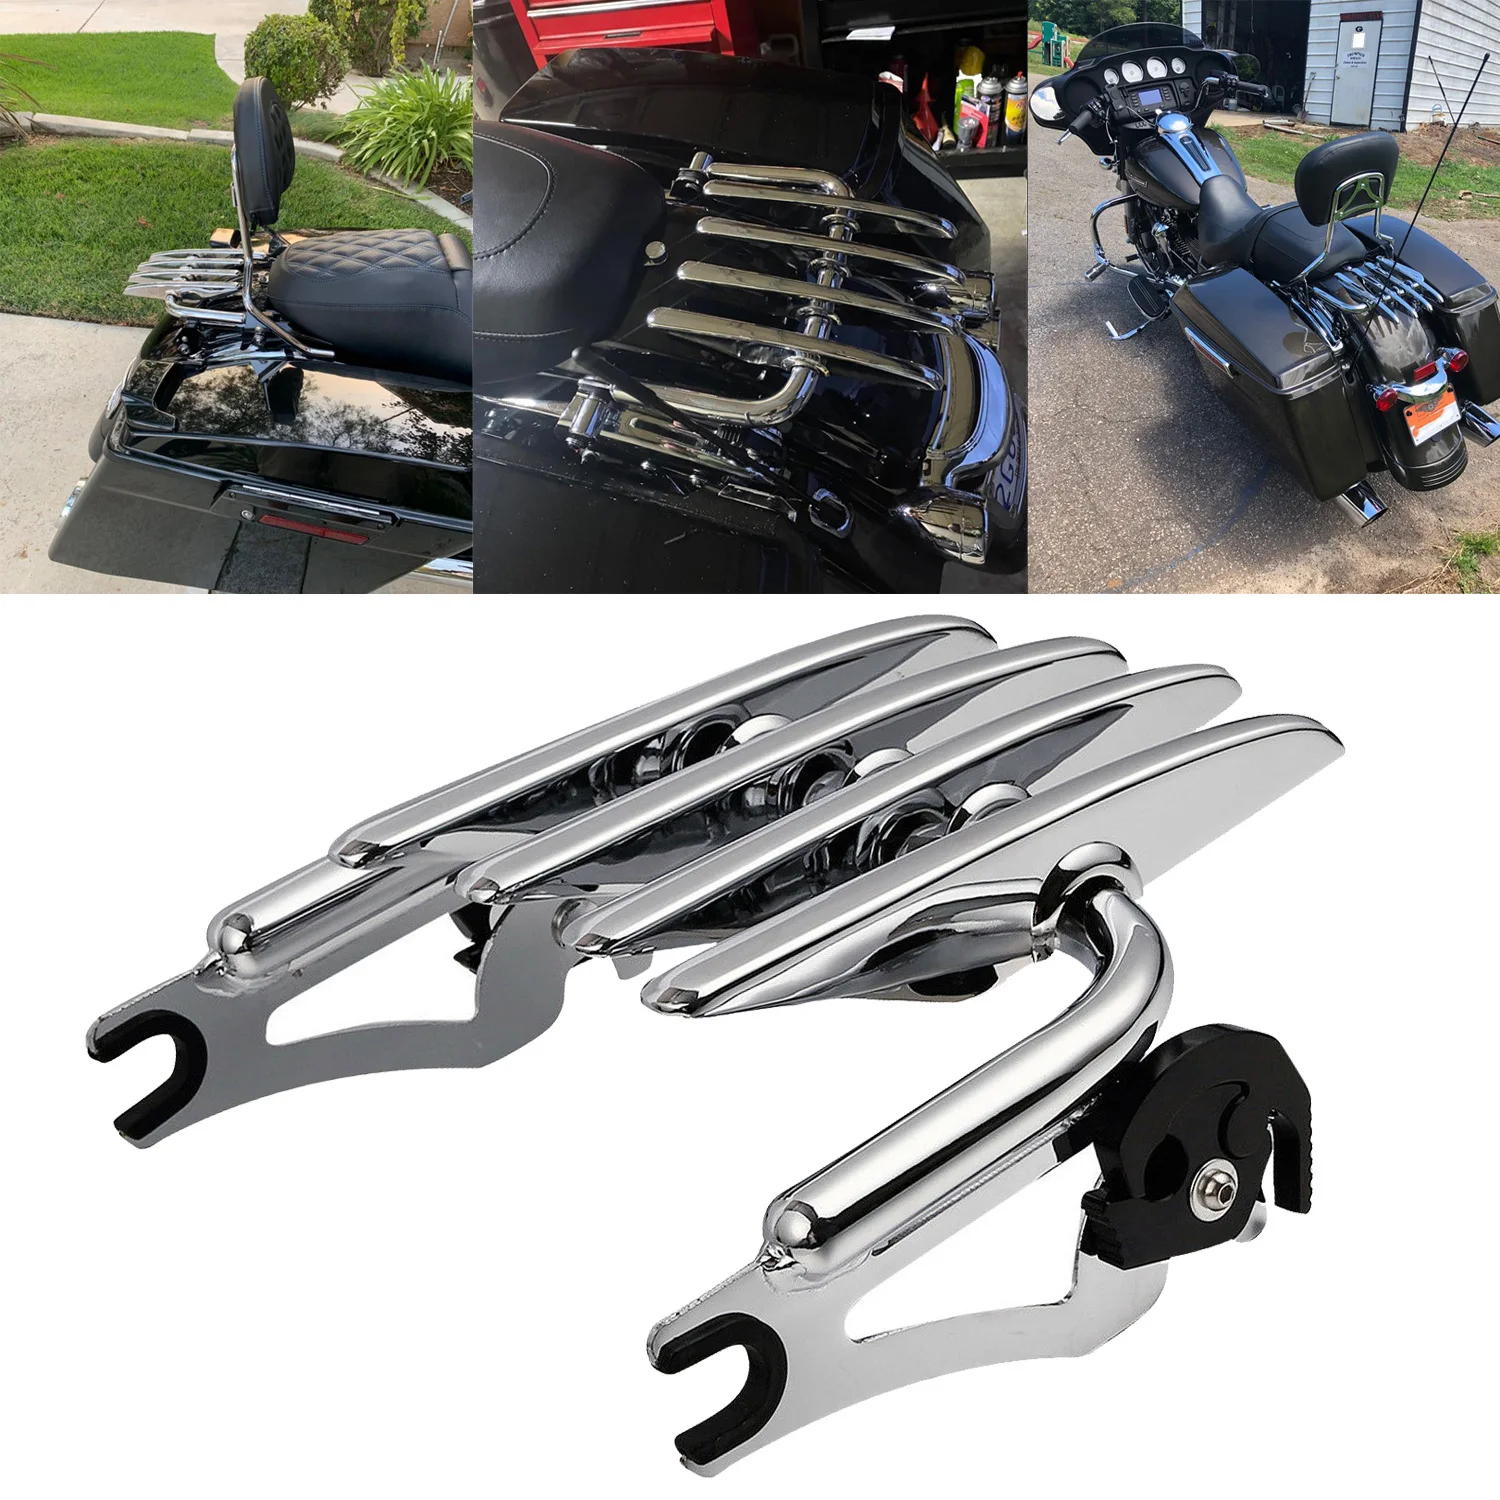 Chrome Detachable Two-Up Stealth Mounting Luggage Rack For Harley Touring Street Electra Glide Road King FLHT FLHX 2009-2023 saddle bag luggage tail lamp following turn signal running hazard brake light for harley touring road king street electra glide